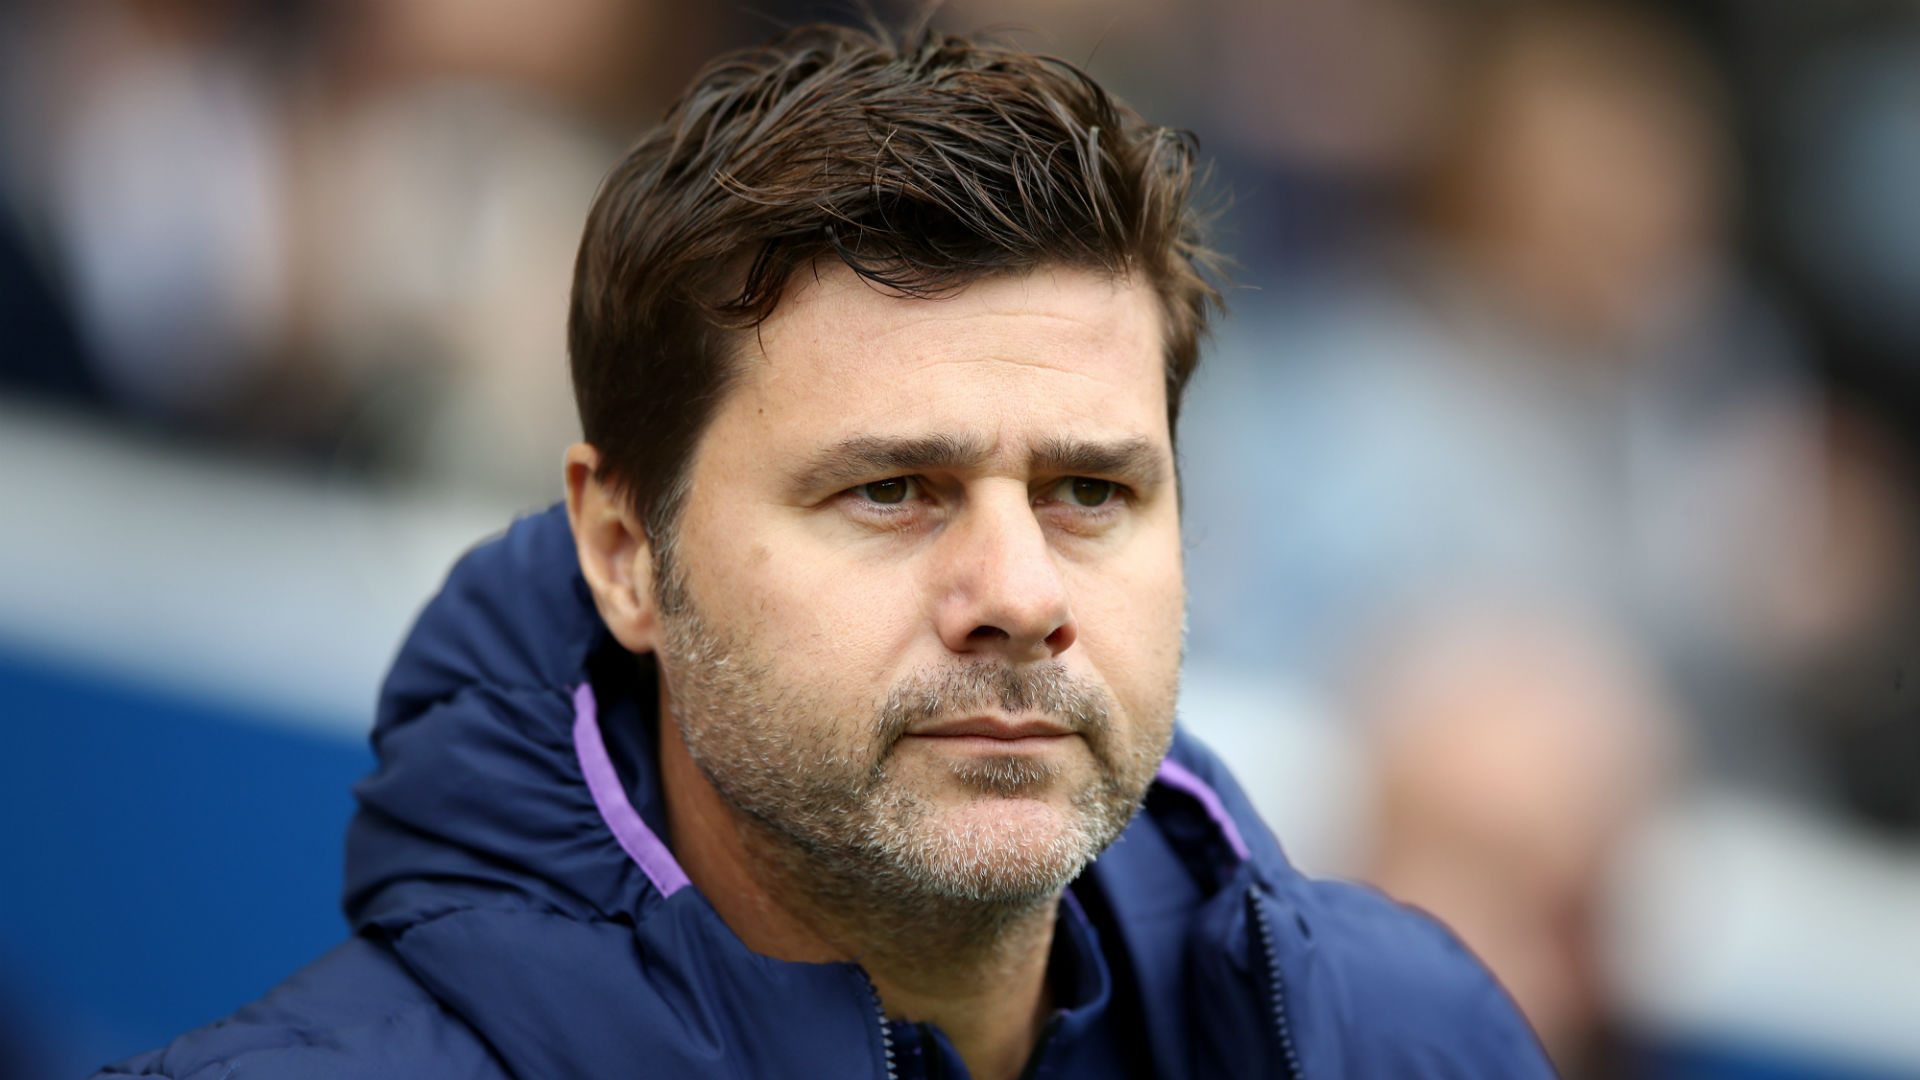 Losing before the international break left Mauricio Pochettino feeling "dead", but he is now ready to lead Tottenham through a tough spell.